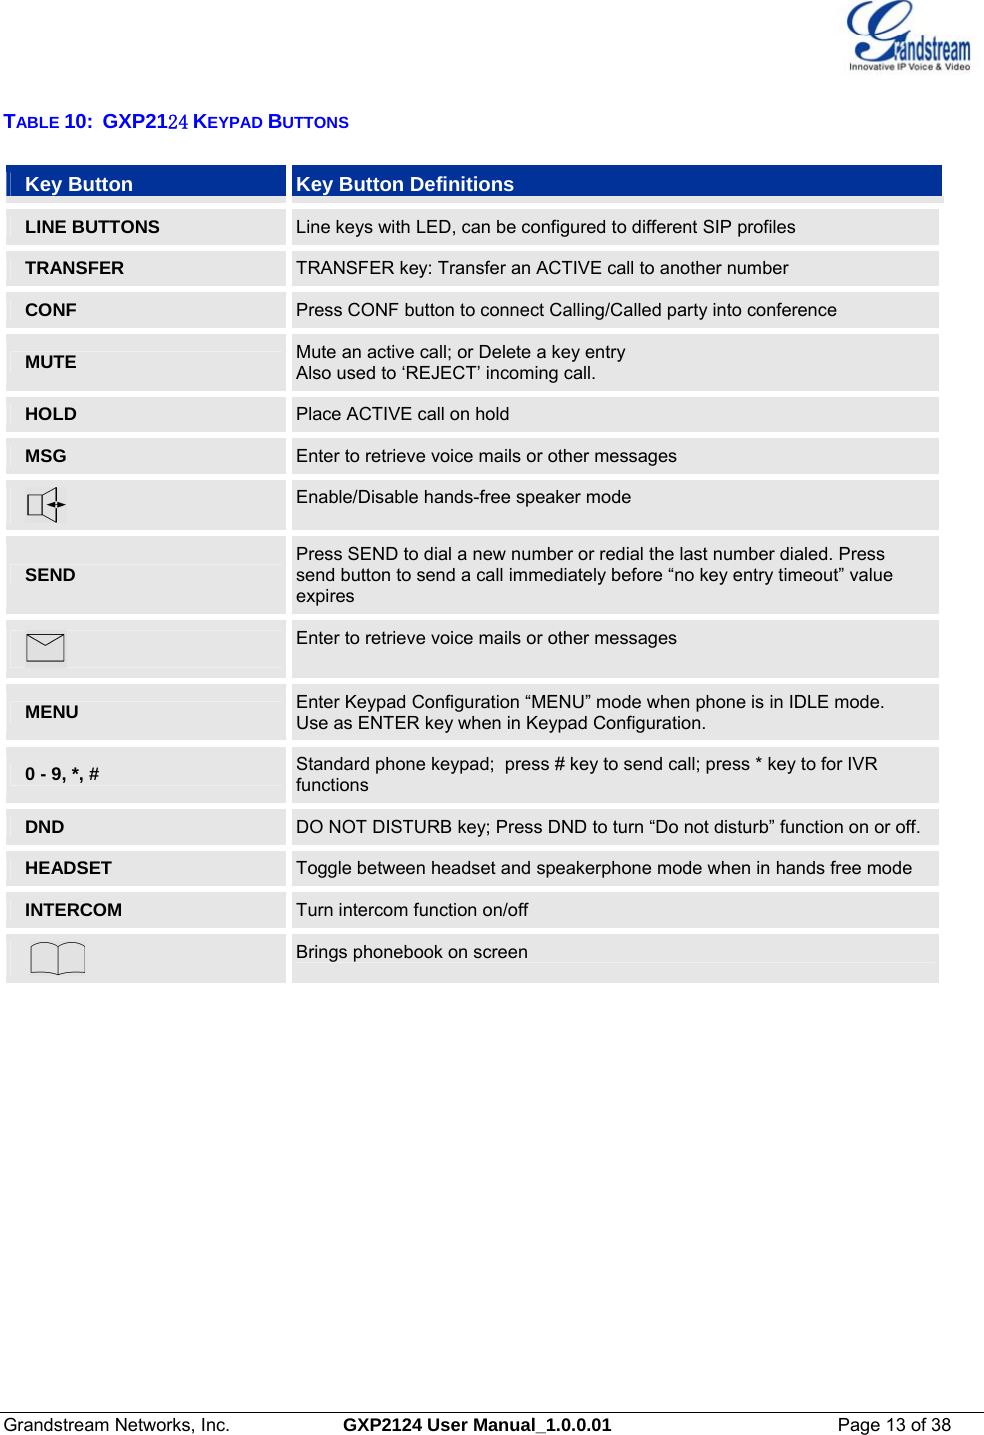  Grandstream Networks, Inc.  GXP2124 User Manual_1.0.0.01  Page 13 of 38                                                                                                                      TABLE 10:  GXP2124 KEYPAD BUTTONS Key Button  Key Button Definitions LINE BUTTONS   Line keys with LED, can be configured to different SIP profiles TRANSFER  TRANSFER key: Transfer an ACTIVE call to another number CONF  Press CONF button to connect Calling/Called party into conference MUTE  Mute an active call; or Delete a key entry Also used to ‘REJECT’ incoming call. HOLD  Place ACTIVE call on hold MSG  Enter to retrieve voice mails or other messages  Enable/Disable hands-free speaker mode SEND   Press SEND to dial a new number or redial the last number dialed. Press send button to send a call immediately before “no key entry timeout” value expires  Enter to retrieve voice mails or other messages MENU  Enter Keypad Configuration “MENU” mode when phone is in IDLE mode.  Use as ENTER key when in Keypad Configuration.  0 - 9, *, #  Standard phone keypad;  press # key to send call; press * key to for IVR functions DND  DO NOT DISTURB key; Press DND to turn “Do not disturb” function on or off. HEADSET  Toggle between headset and speakerphone mode when in hands free mode INTERCOM  Turn intercom function on/off     Brings phonebook on screen               